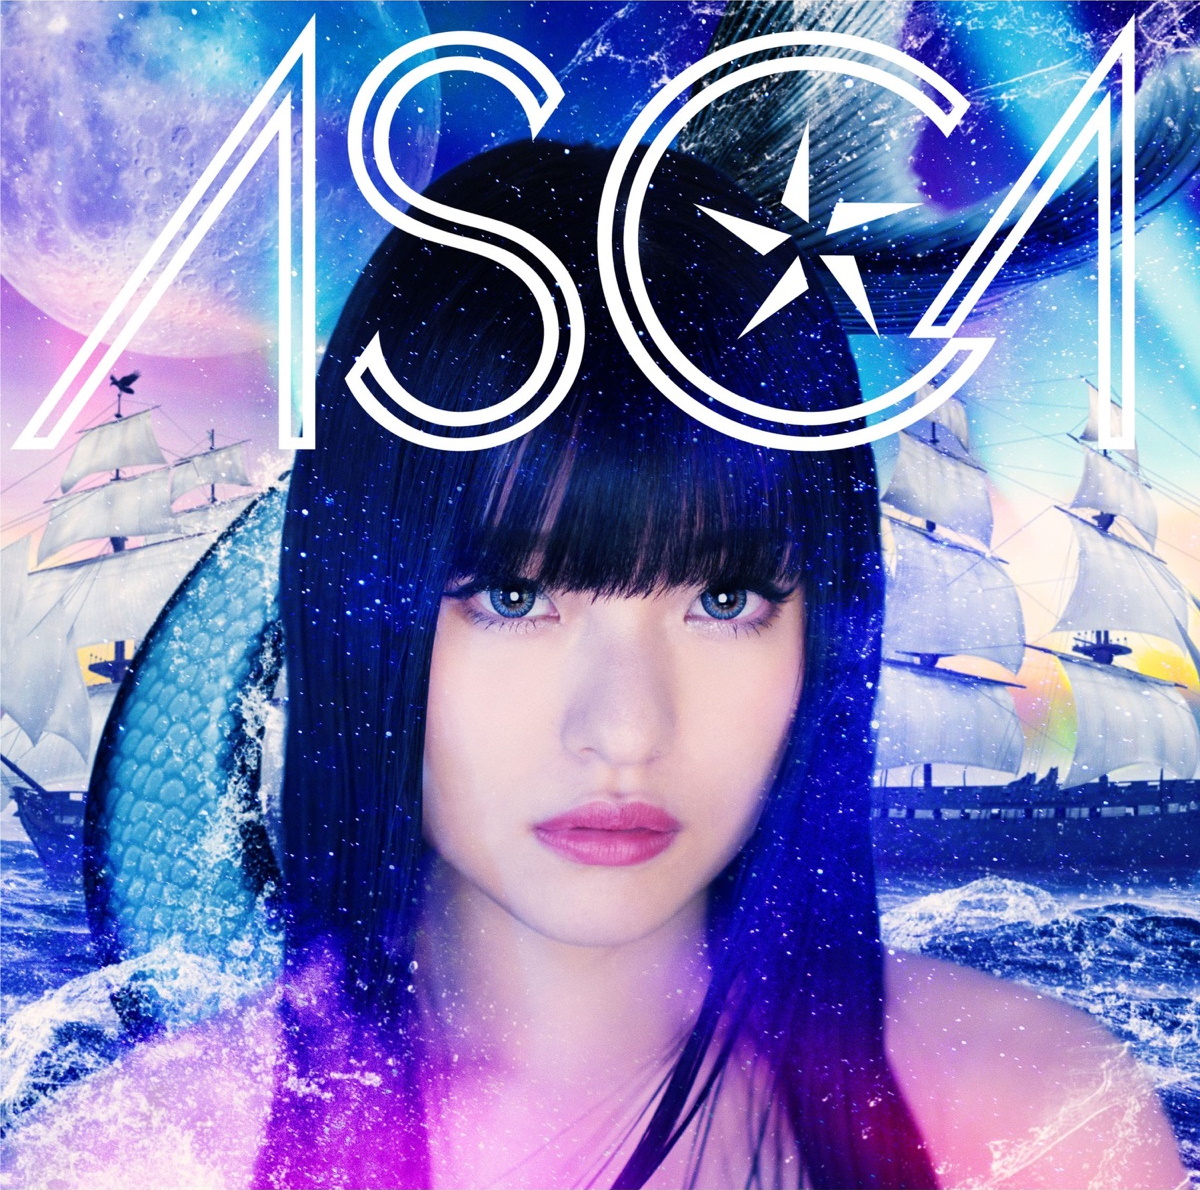 Cover art for『ASCA - 命に嫌われている。』from the release『Hyakki Yakou